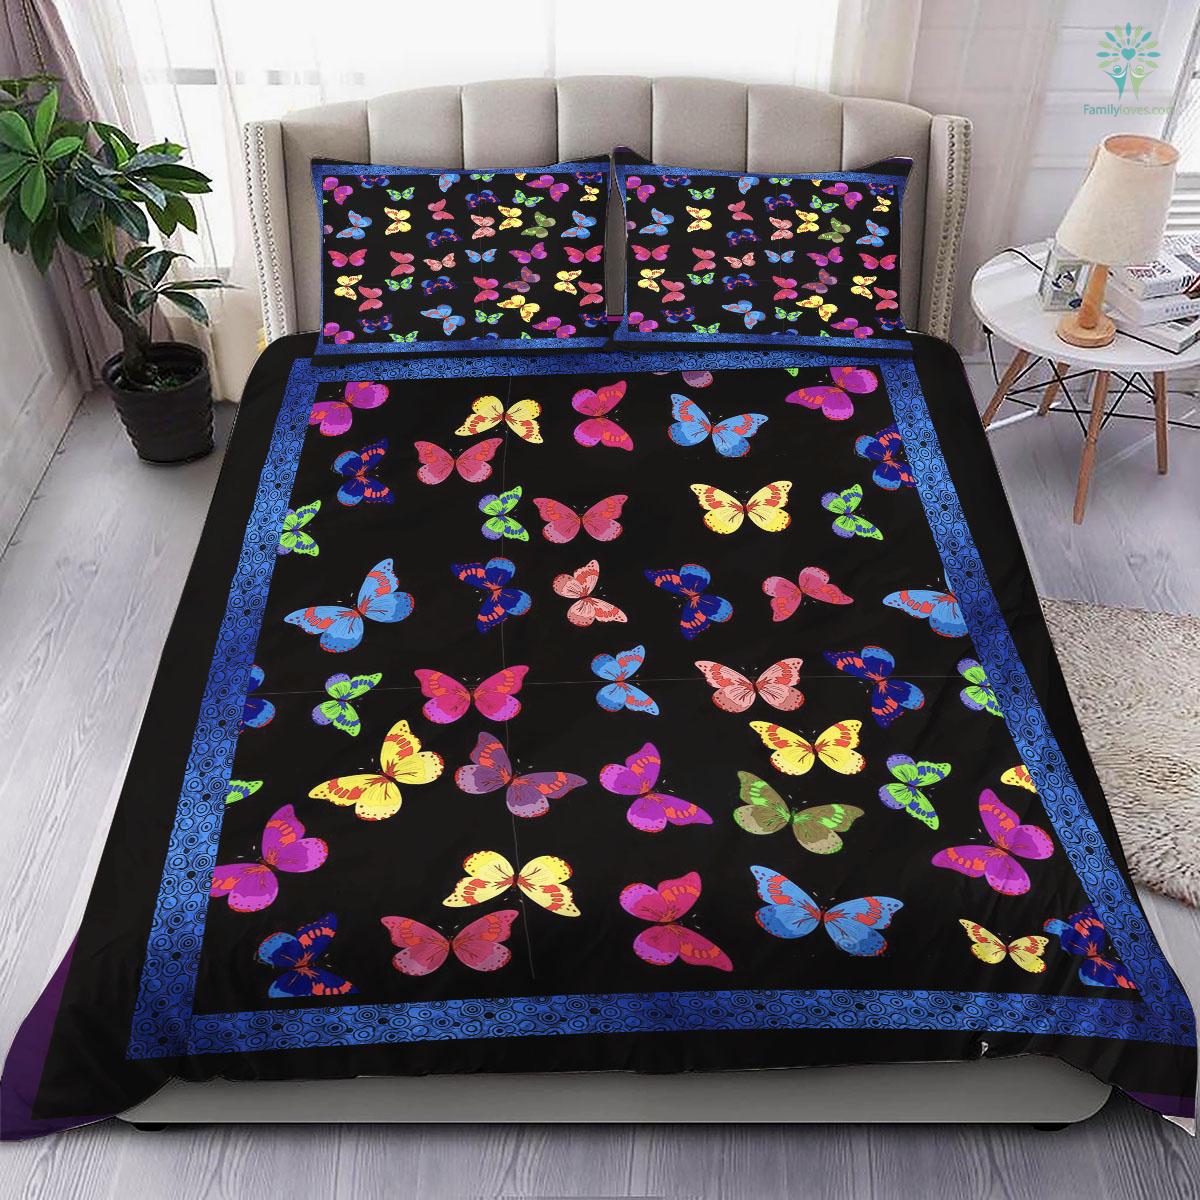 Butterfly 3 Bedding - Family Loves US Military Veterans Shirts Gifts Ideas